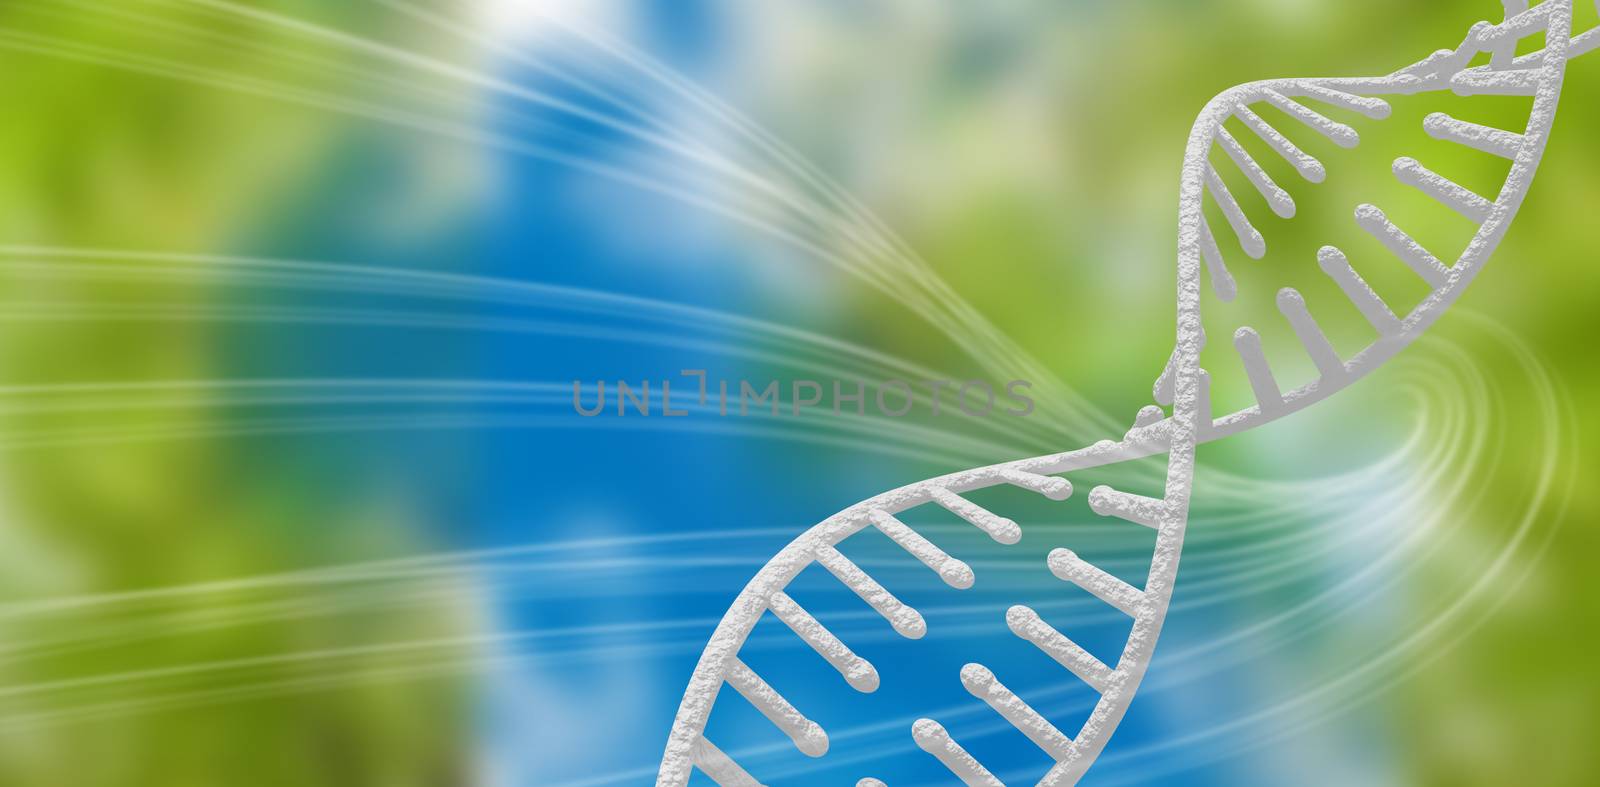 3d Image of dna helix against green background with shiny lines